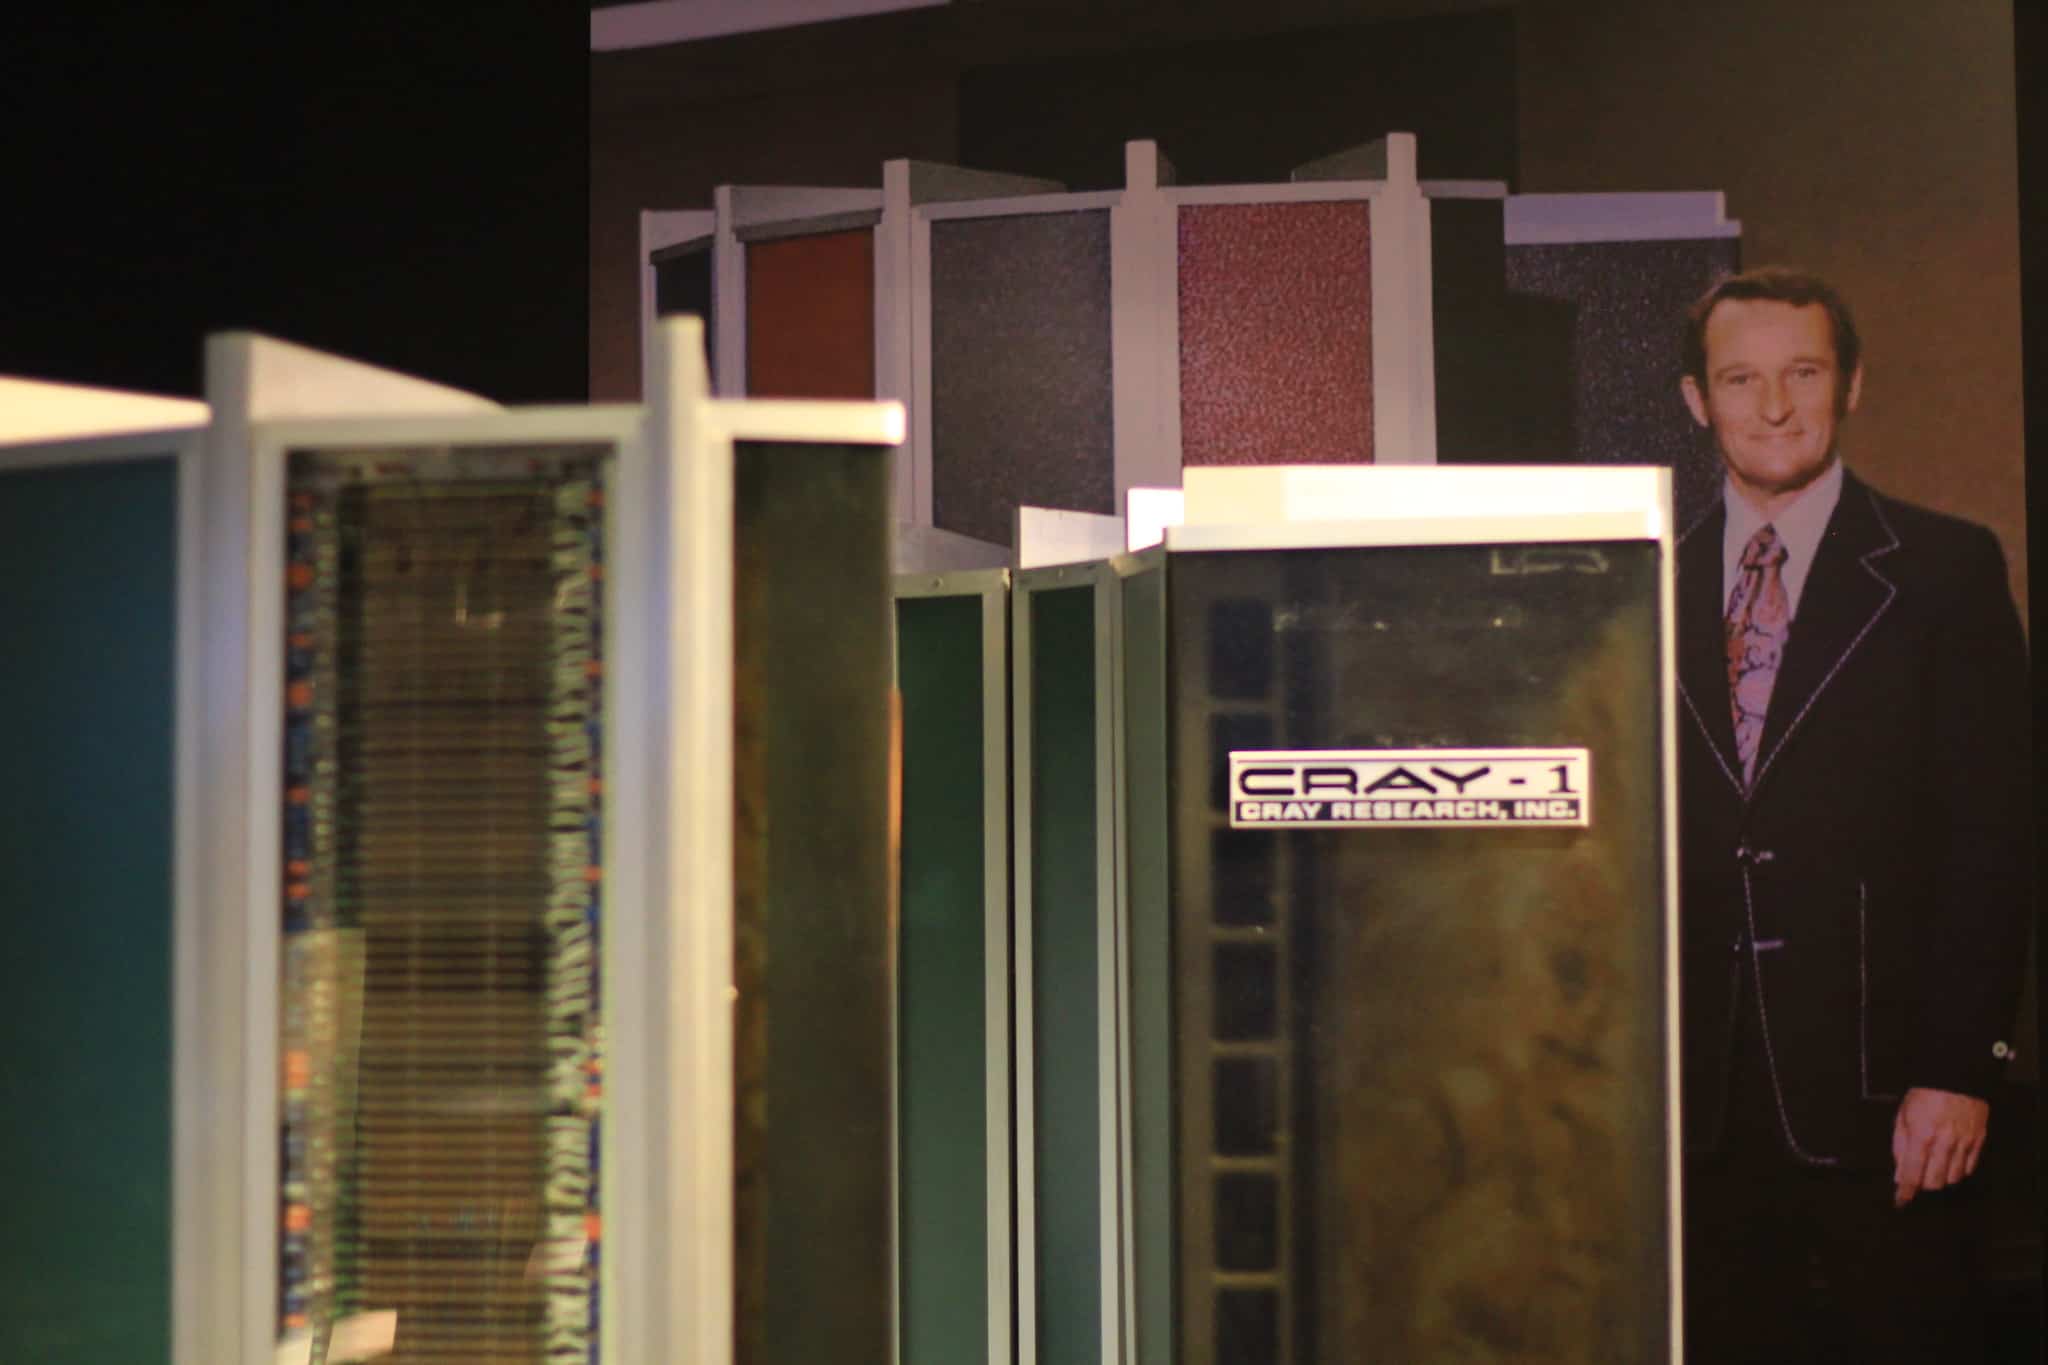 Seymour Cray with the Cray-1 computer